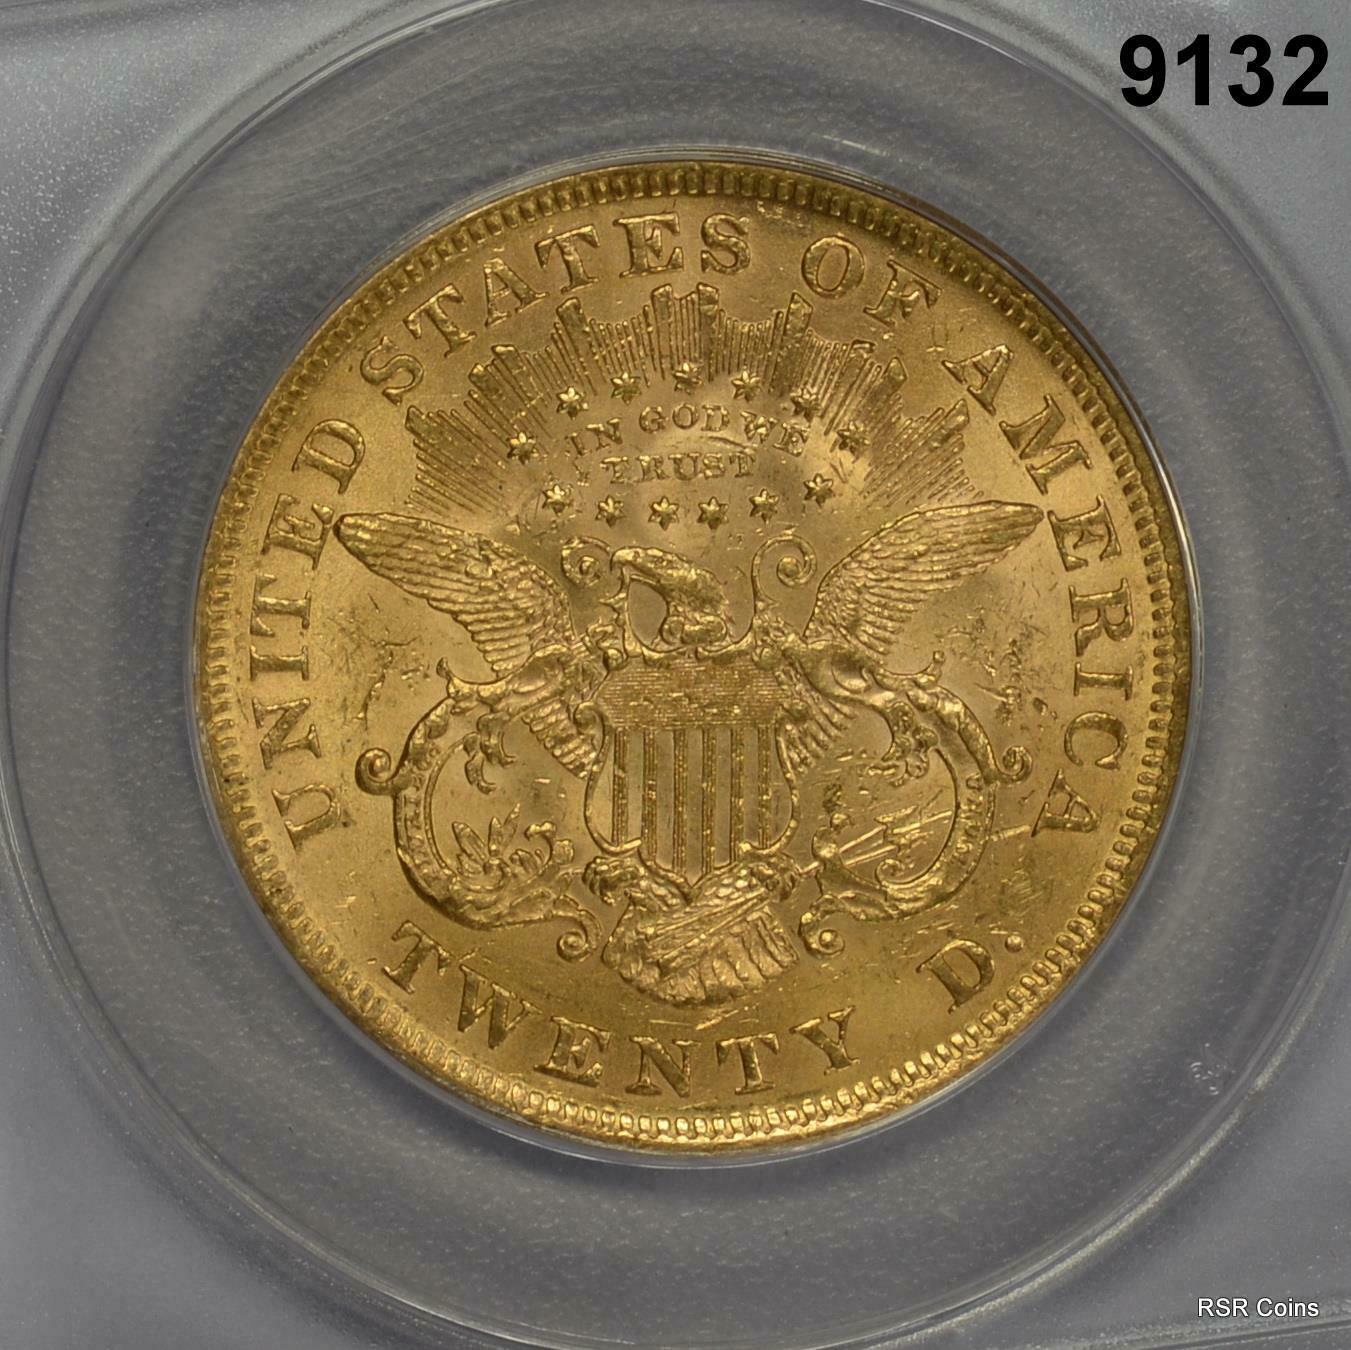 1873 OPEN 3 $20 GOLD LIBERTY ANACS CERTIFIED MS62 NICE LUSTER! #9132